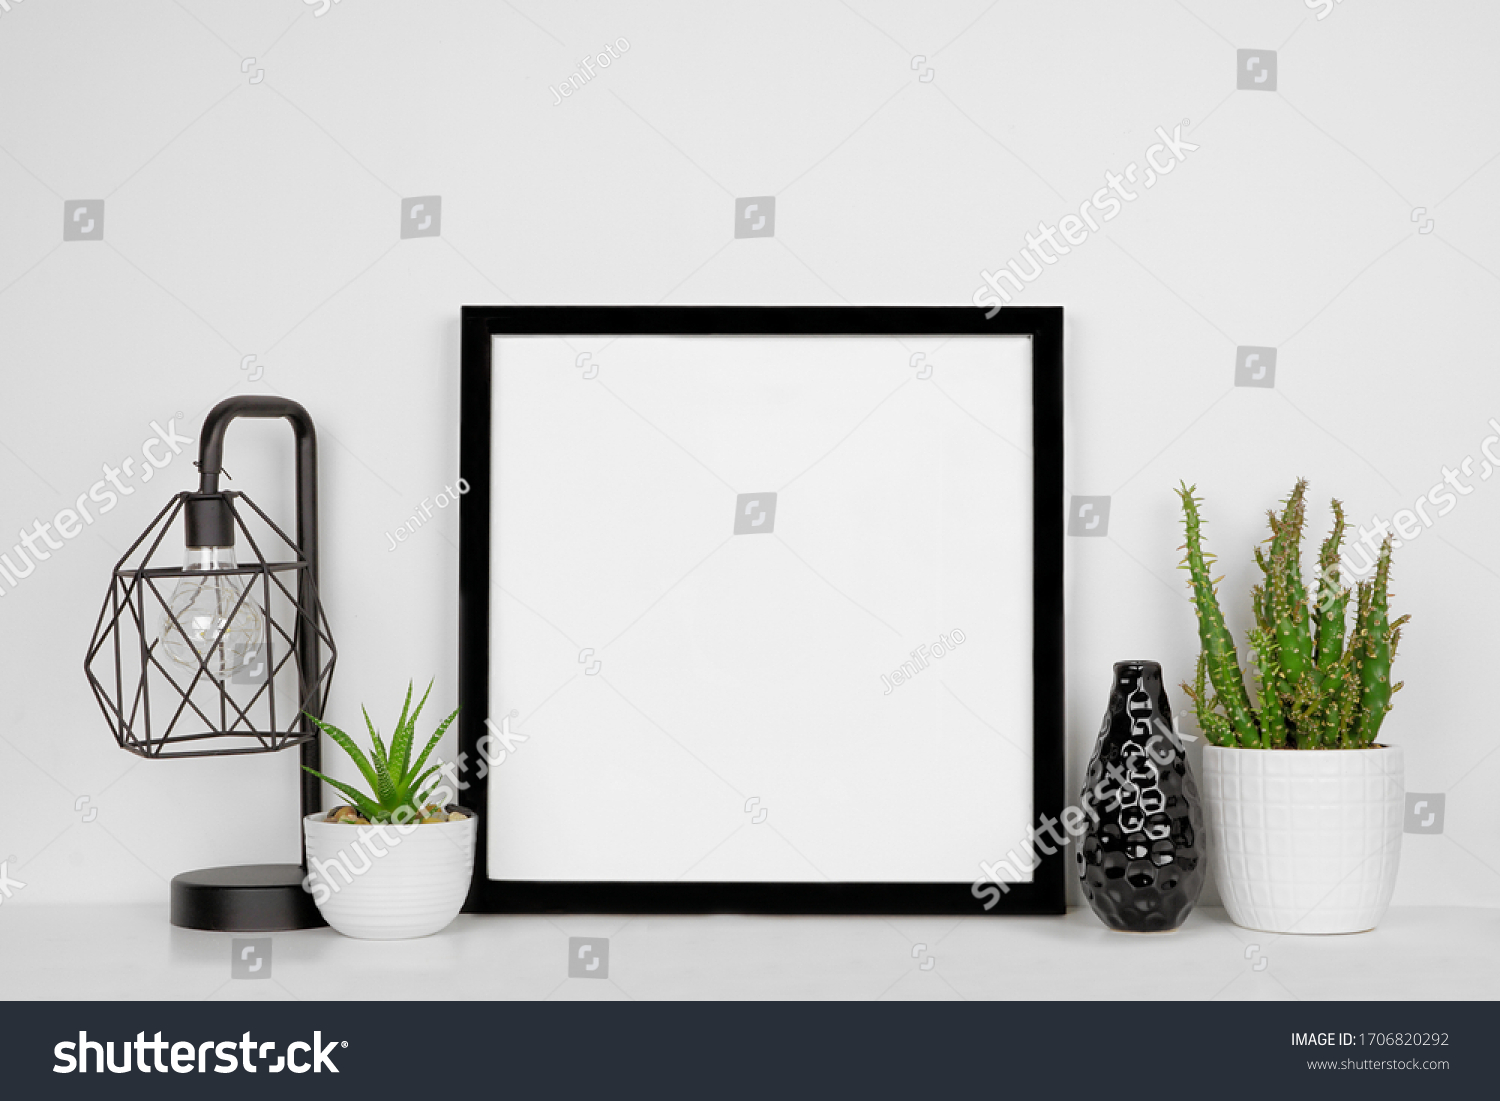 Mock up black square frame with home decor and potted plants. White shelf and wall. Copy space. #1706820292